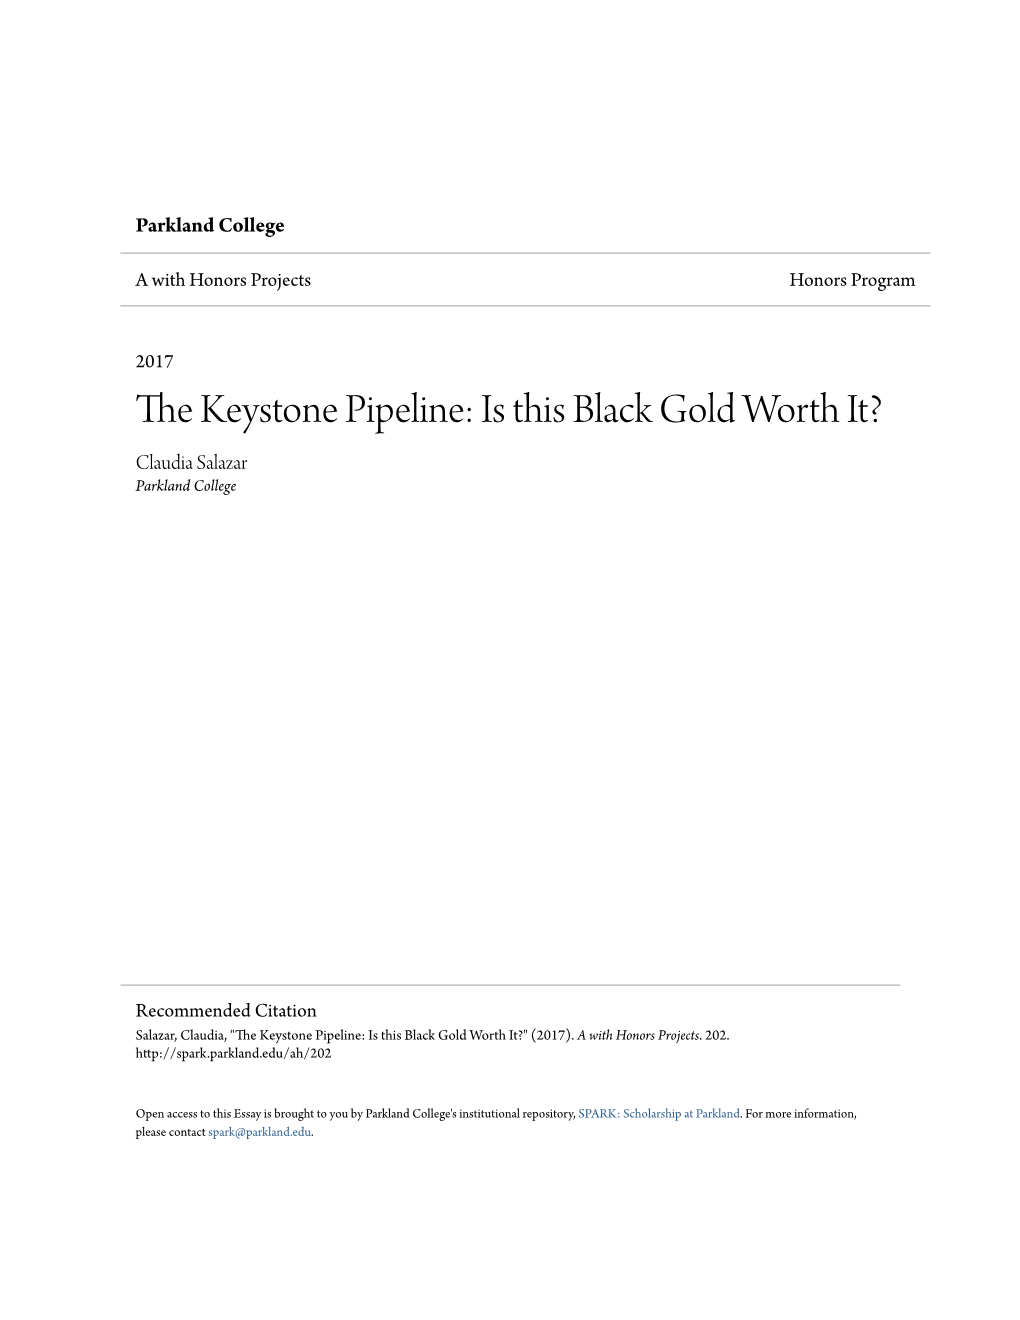 The Keystone Pipeline: Is This Black Gold Worth It? Claudia Salazar Parkland College